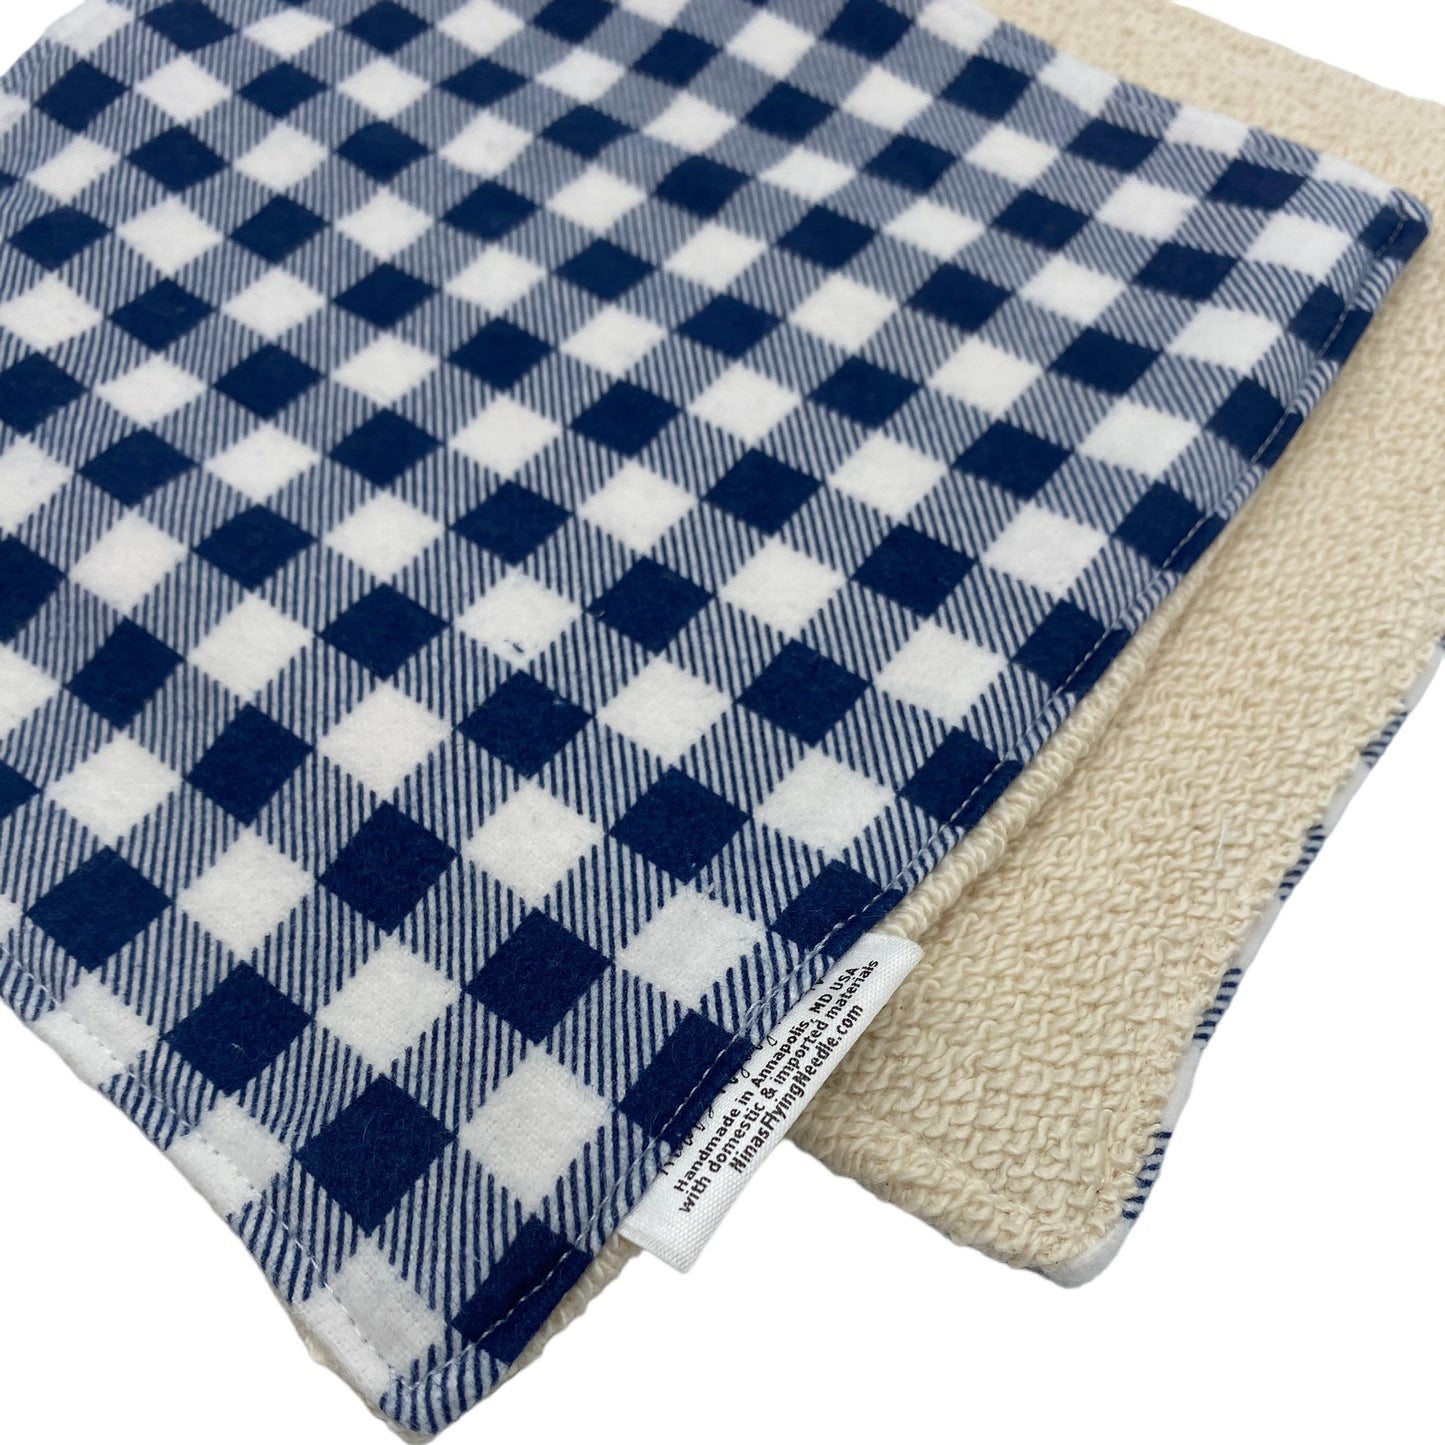 Wash Cloth - Regular - Gingham - Blue and White